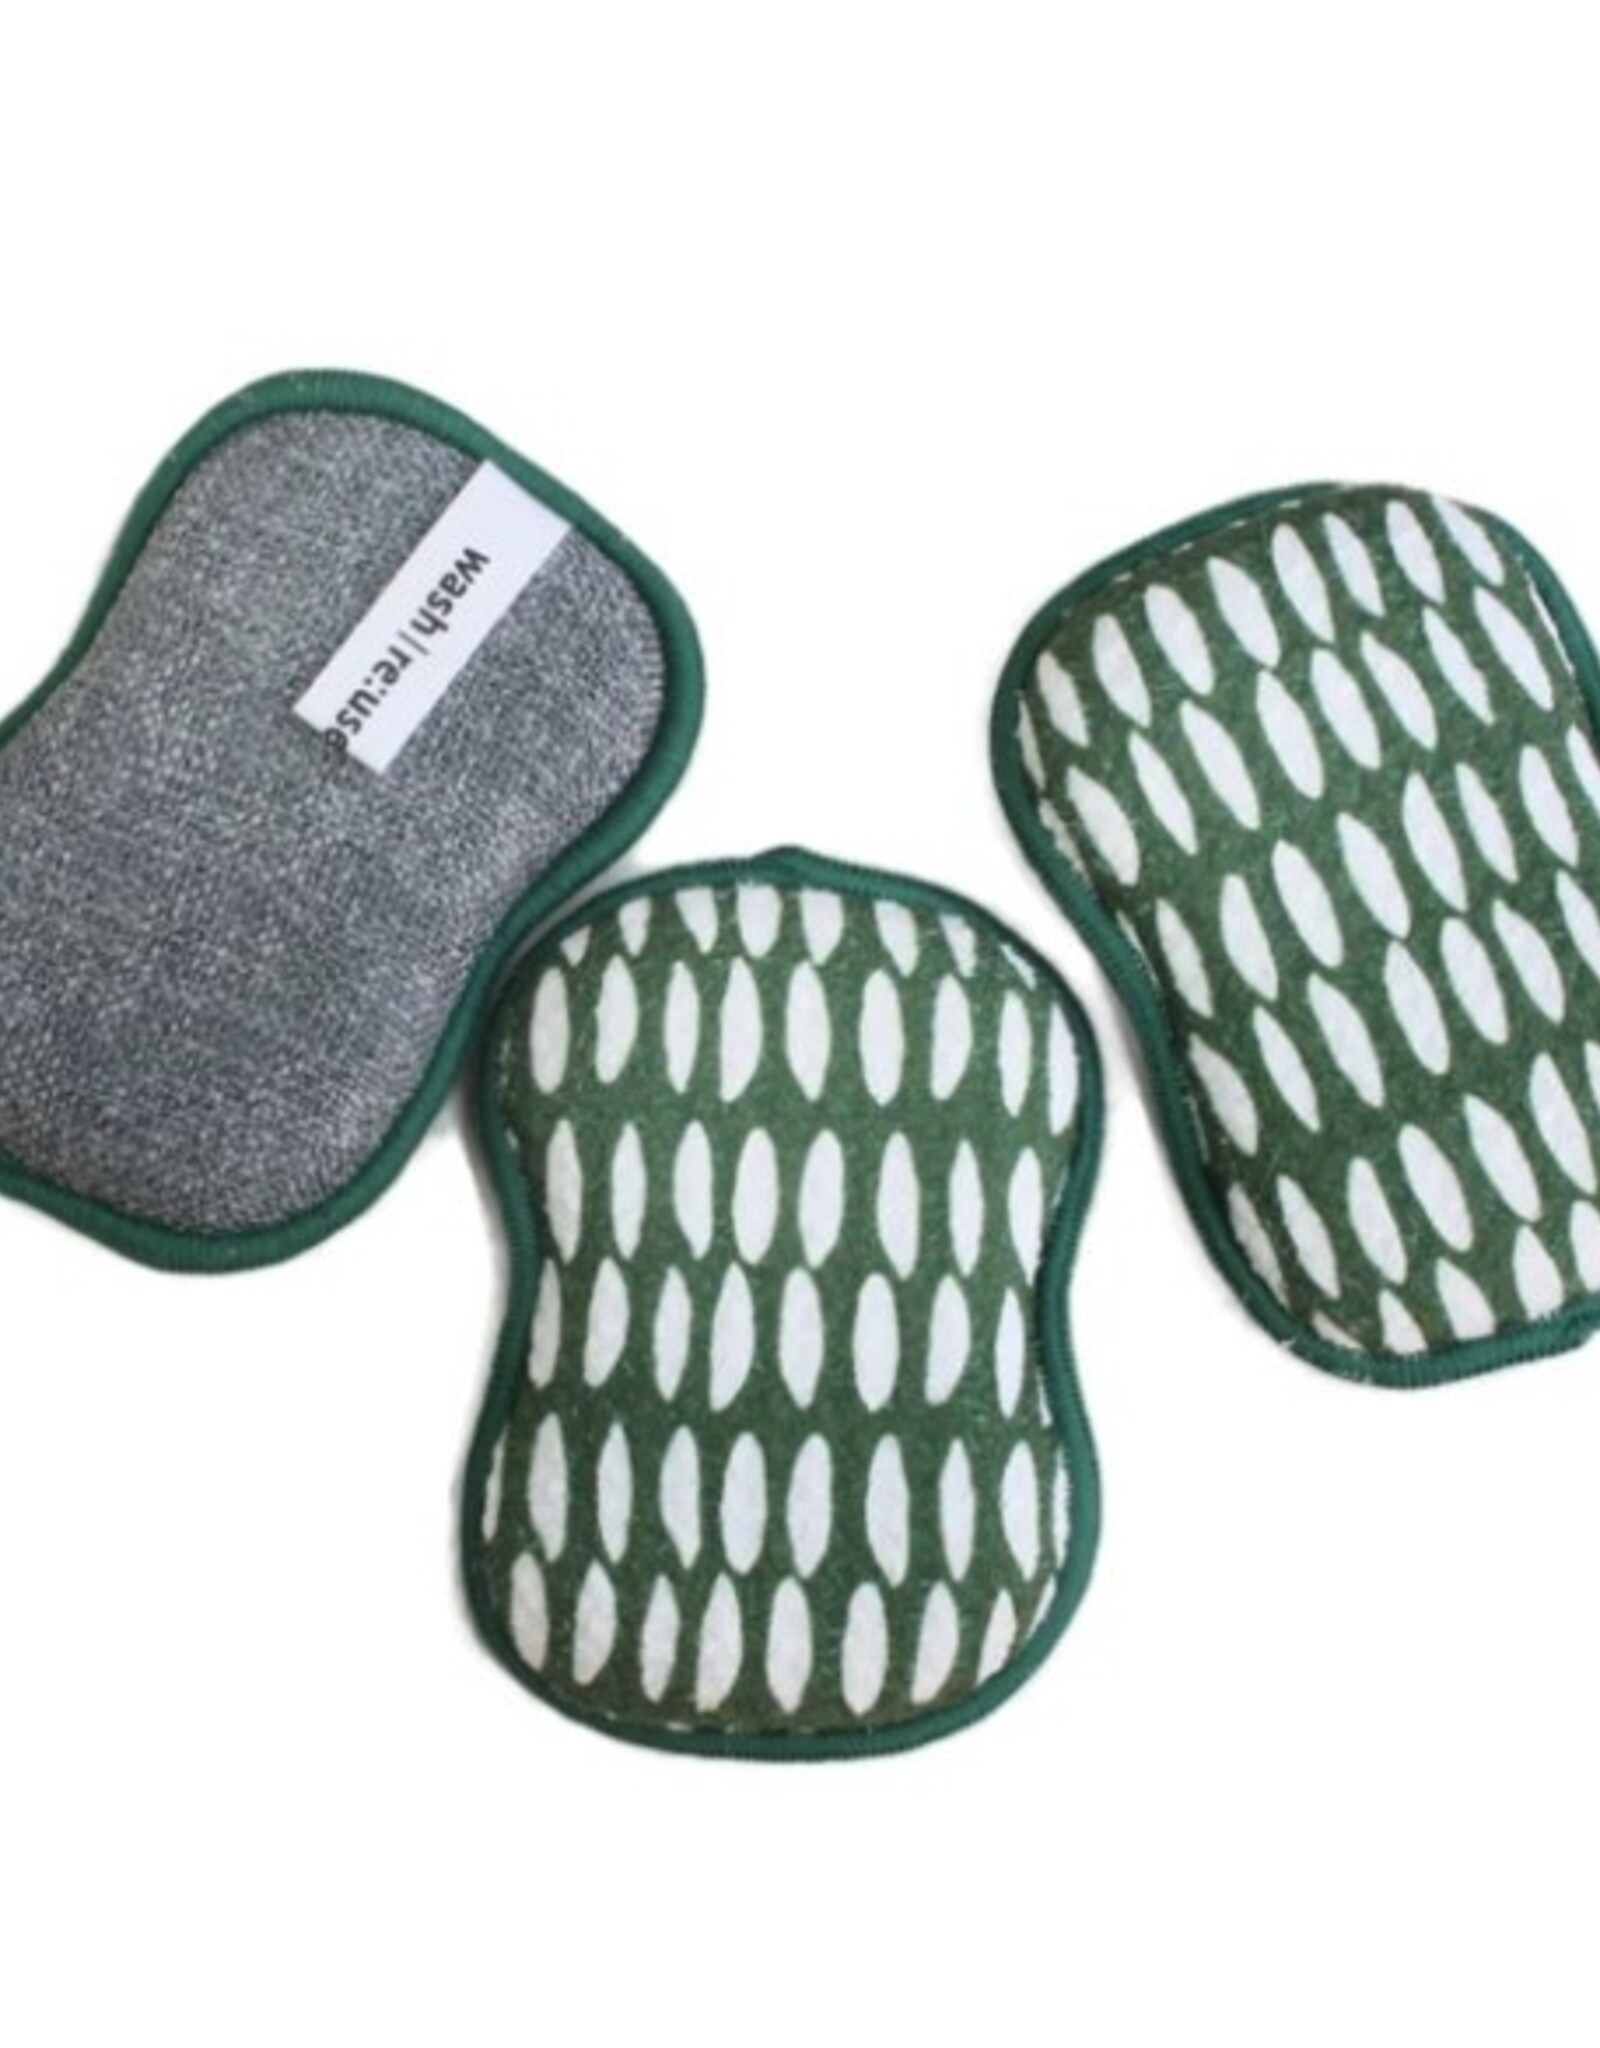 Once Again Home Co. RE:usable Sponges (Set of 3) -